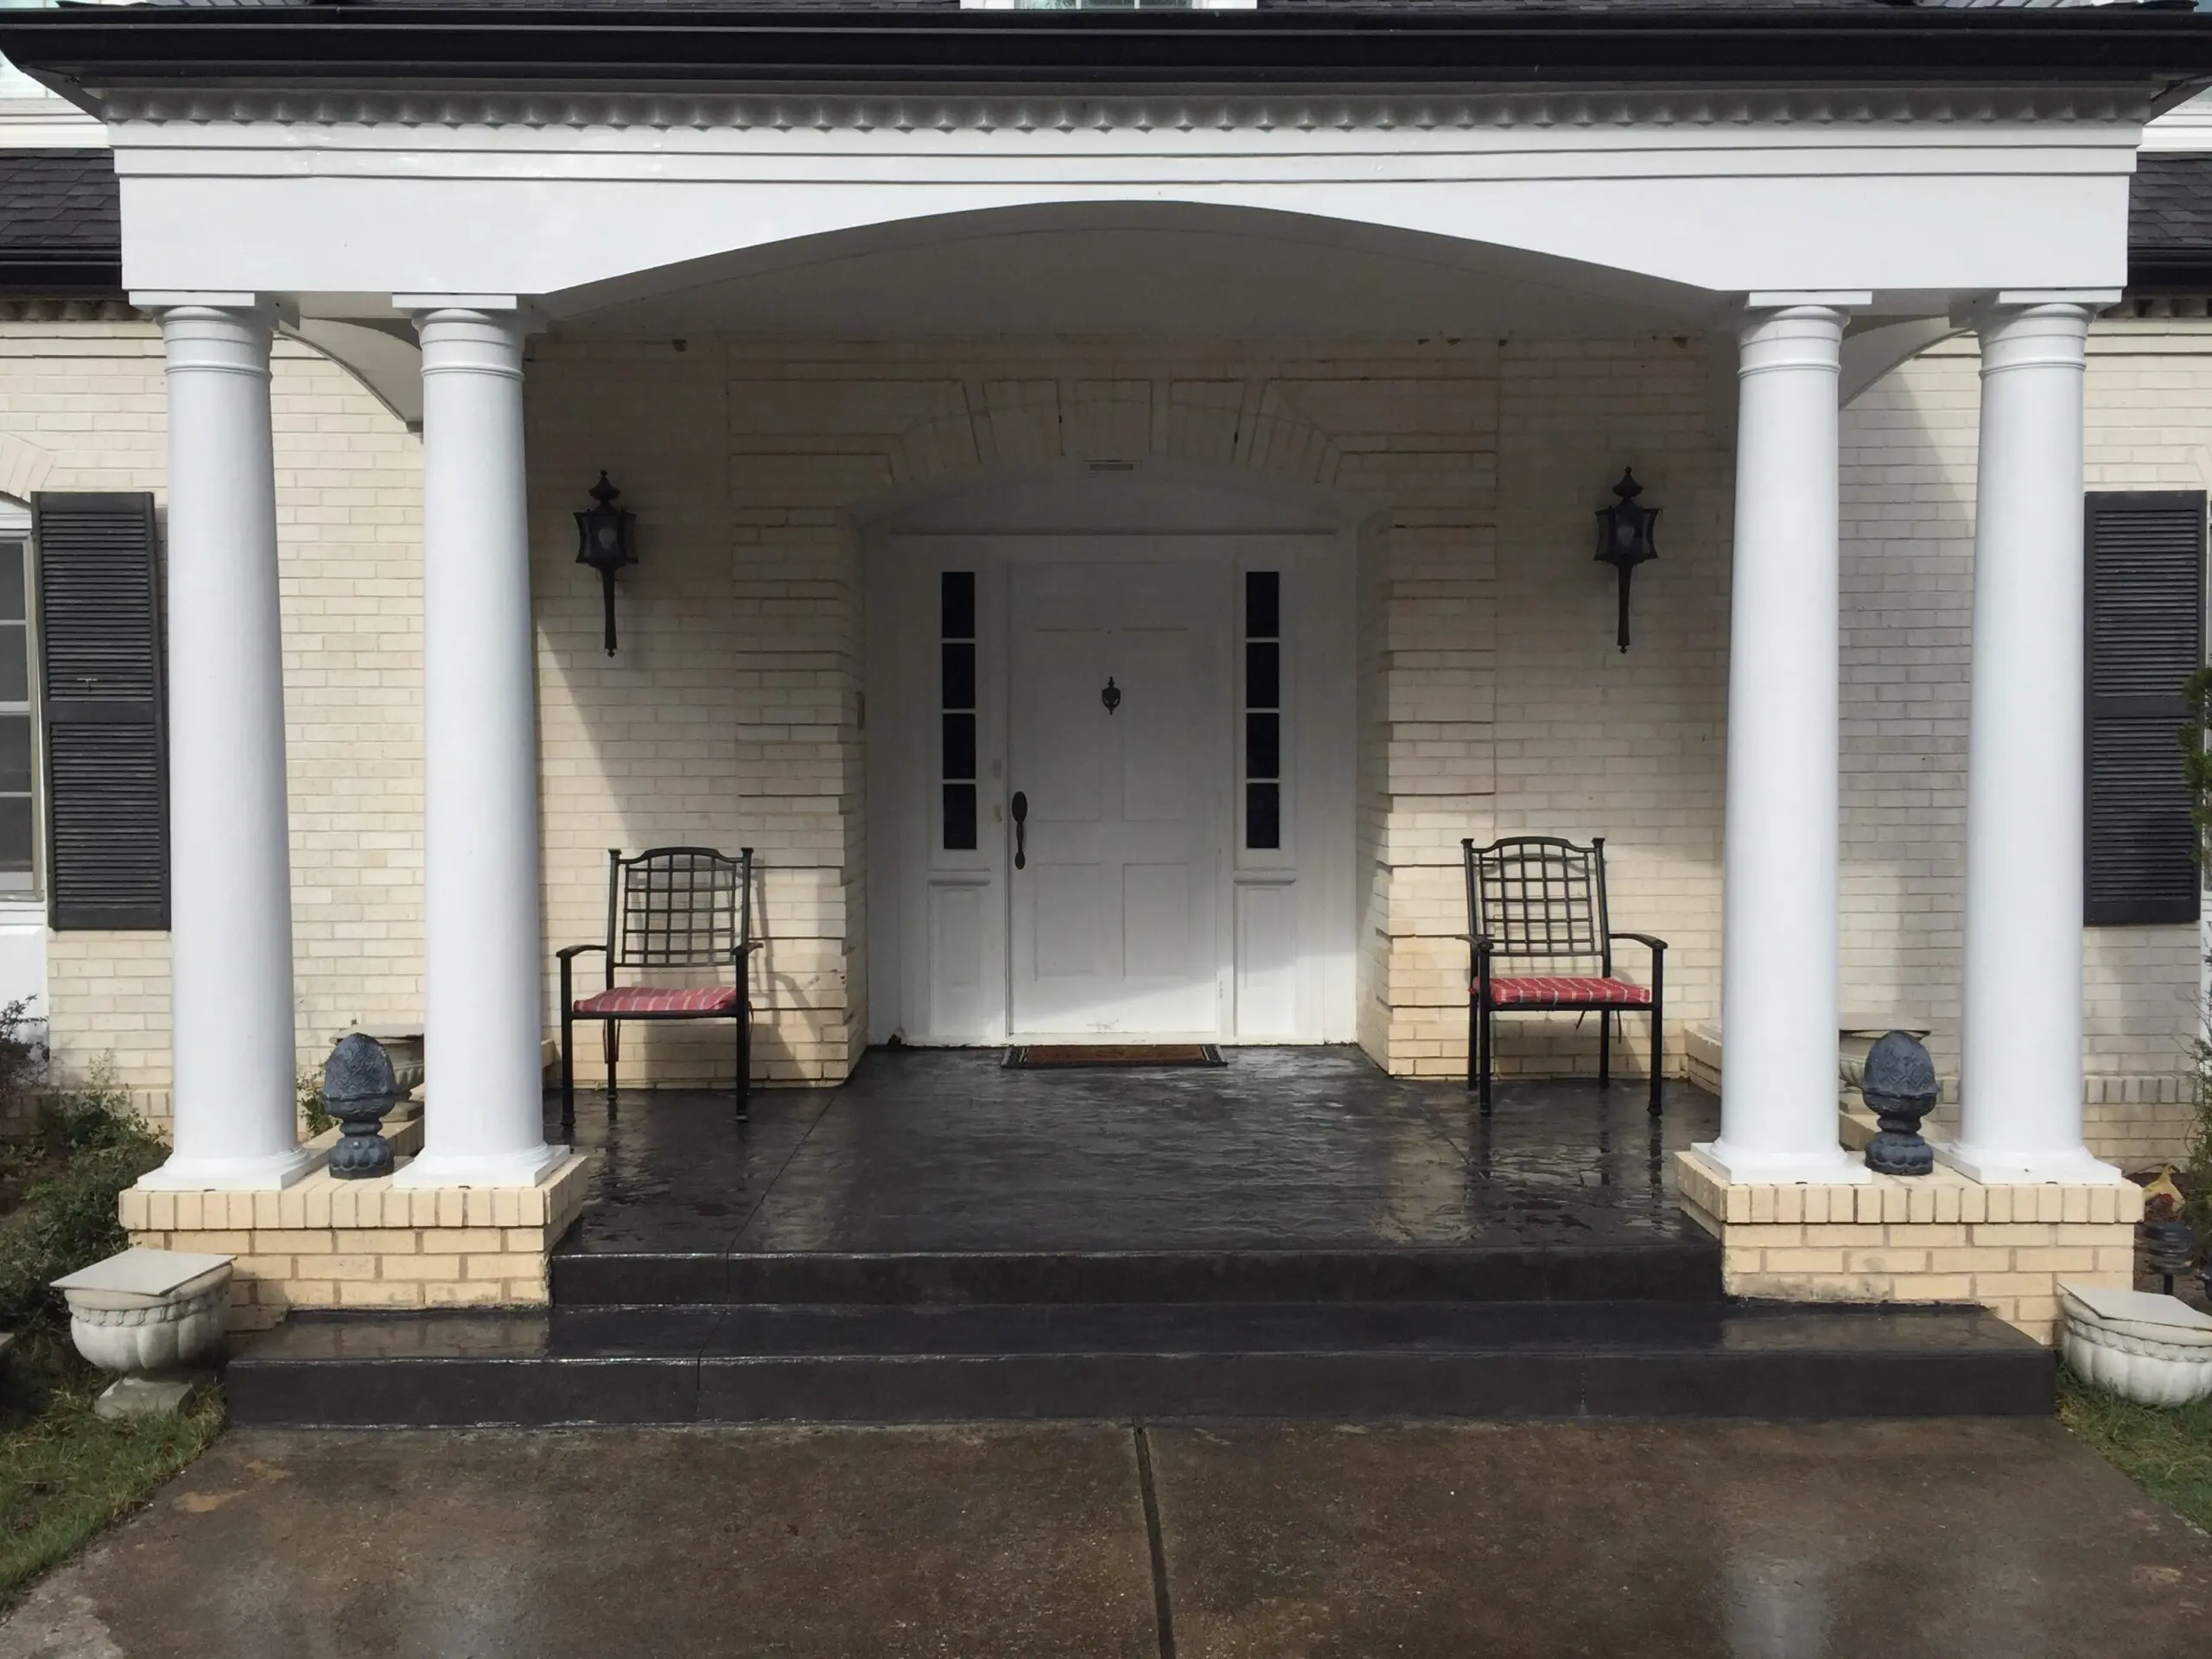 A classic front porch with integral graphite coloring on stamped concrete, flanked by white columns and matching brickwork, creating a striking contrast